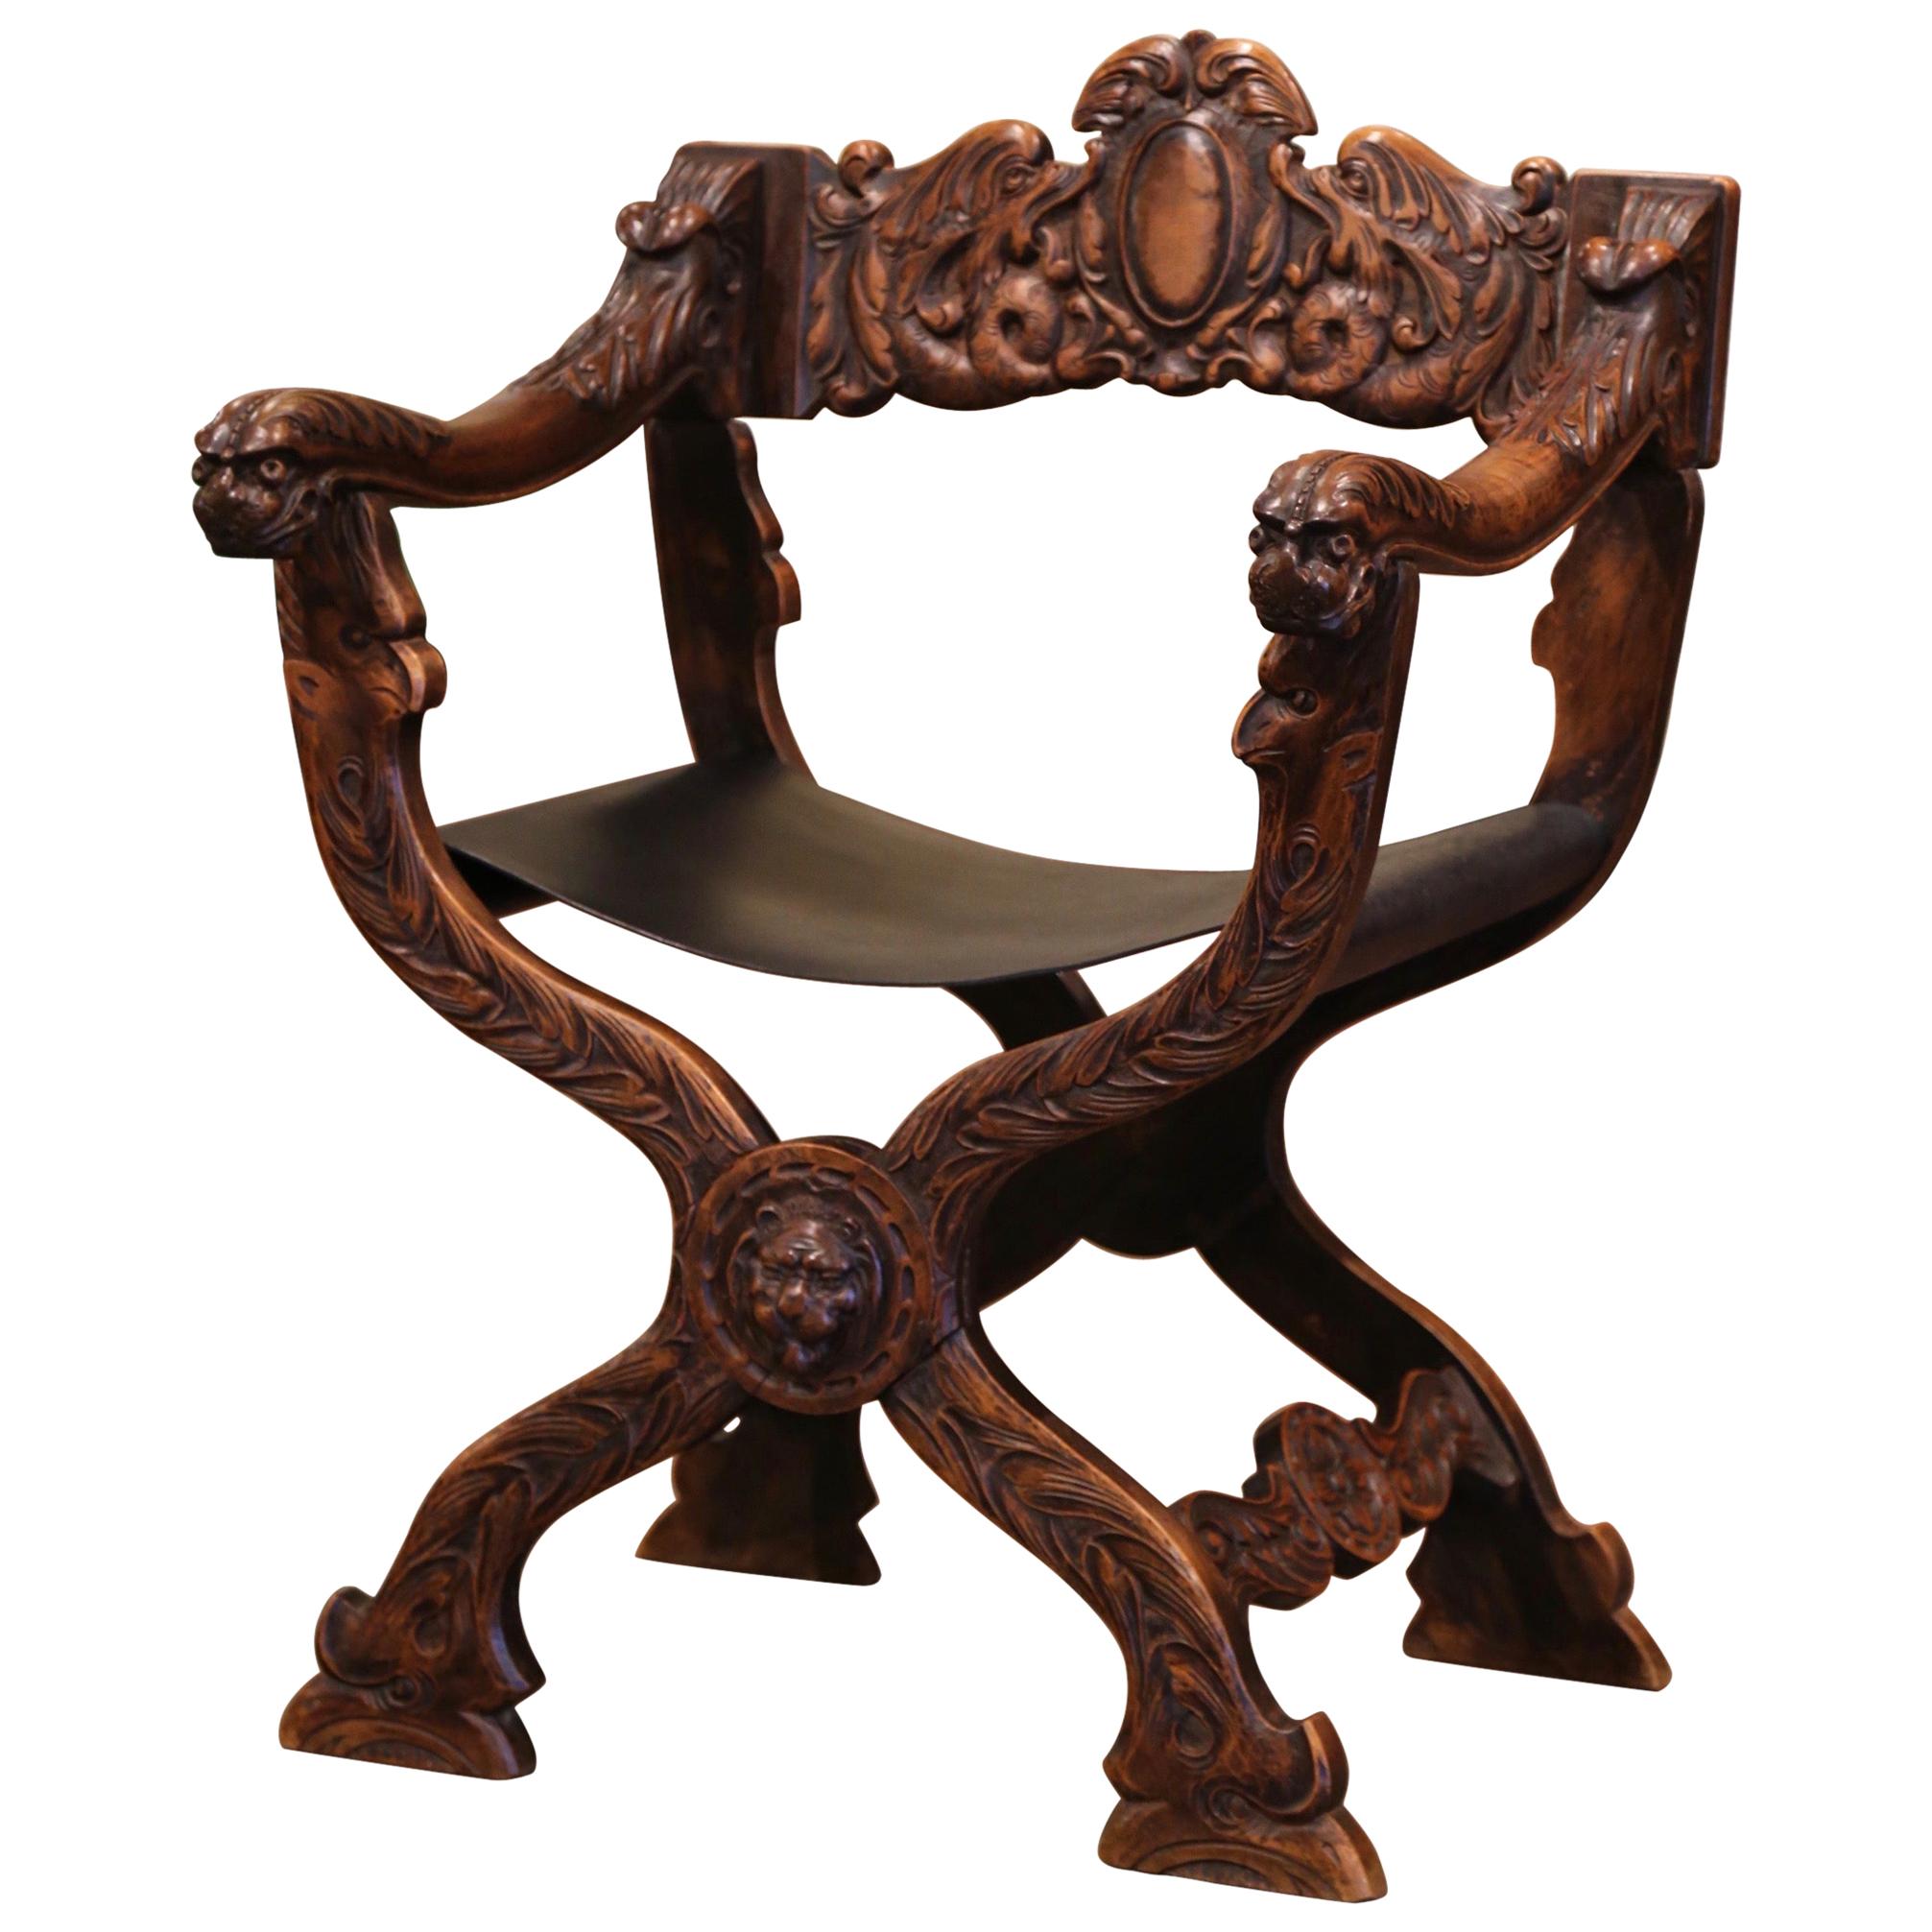 19th Century Italian Renaissance Carved Walnut Desk Armchair with Leather Seat